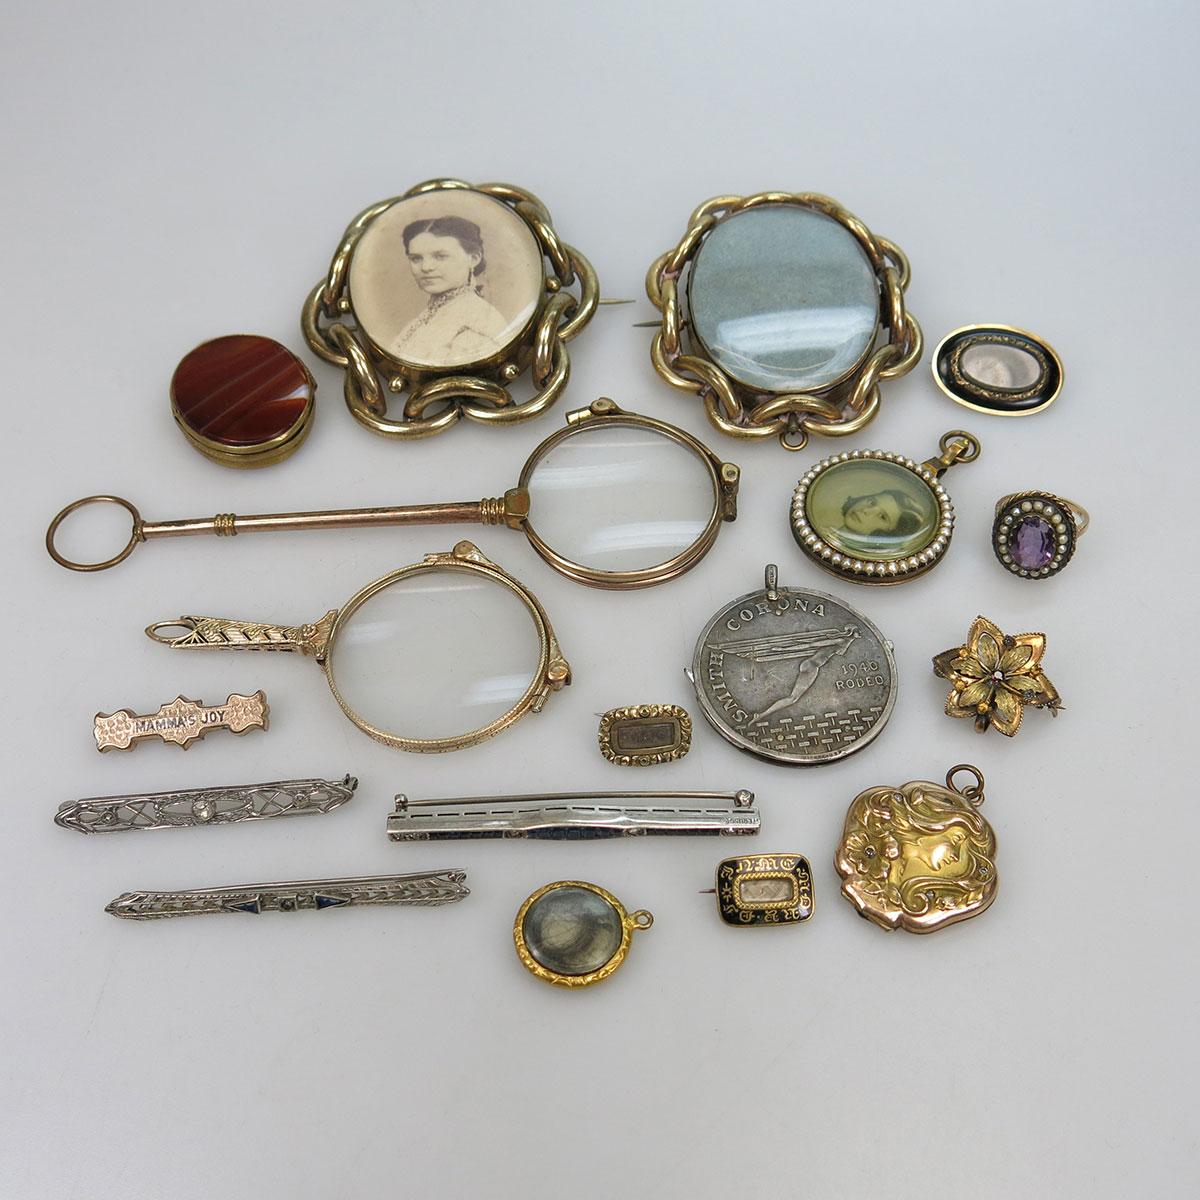 Small Quantity Of Gold-Filled And Silver Jewellery